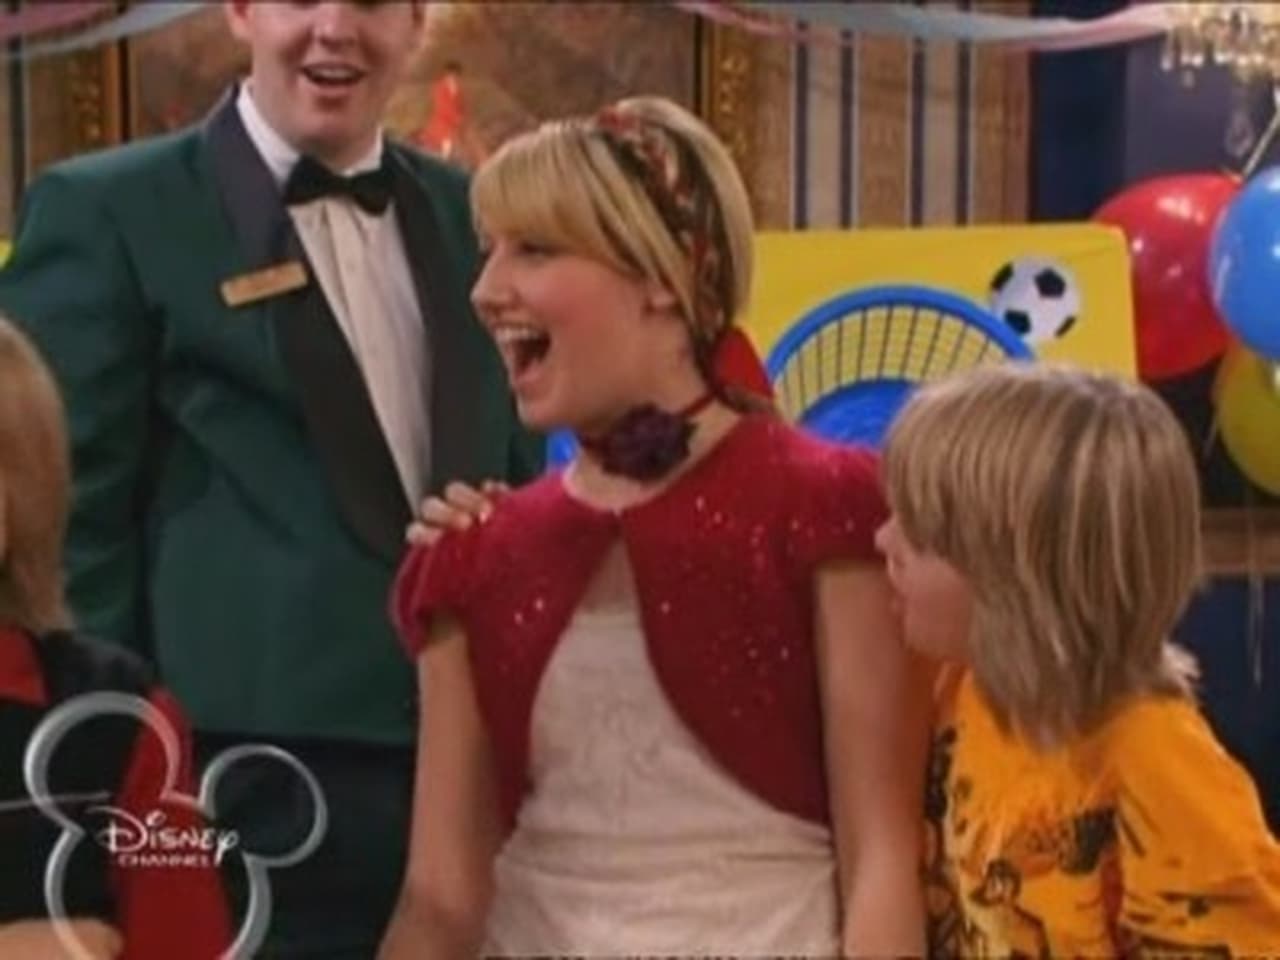 The Suite Life of Zack & Cody - Season 2 Episode 20 : That's So Suite Life of Hannah Montana (II)